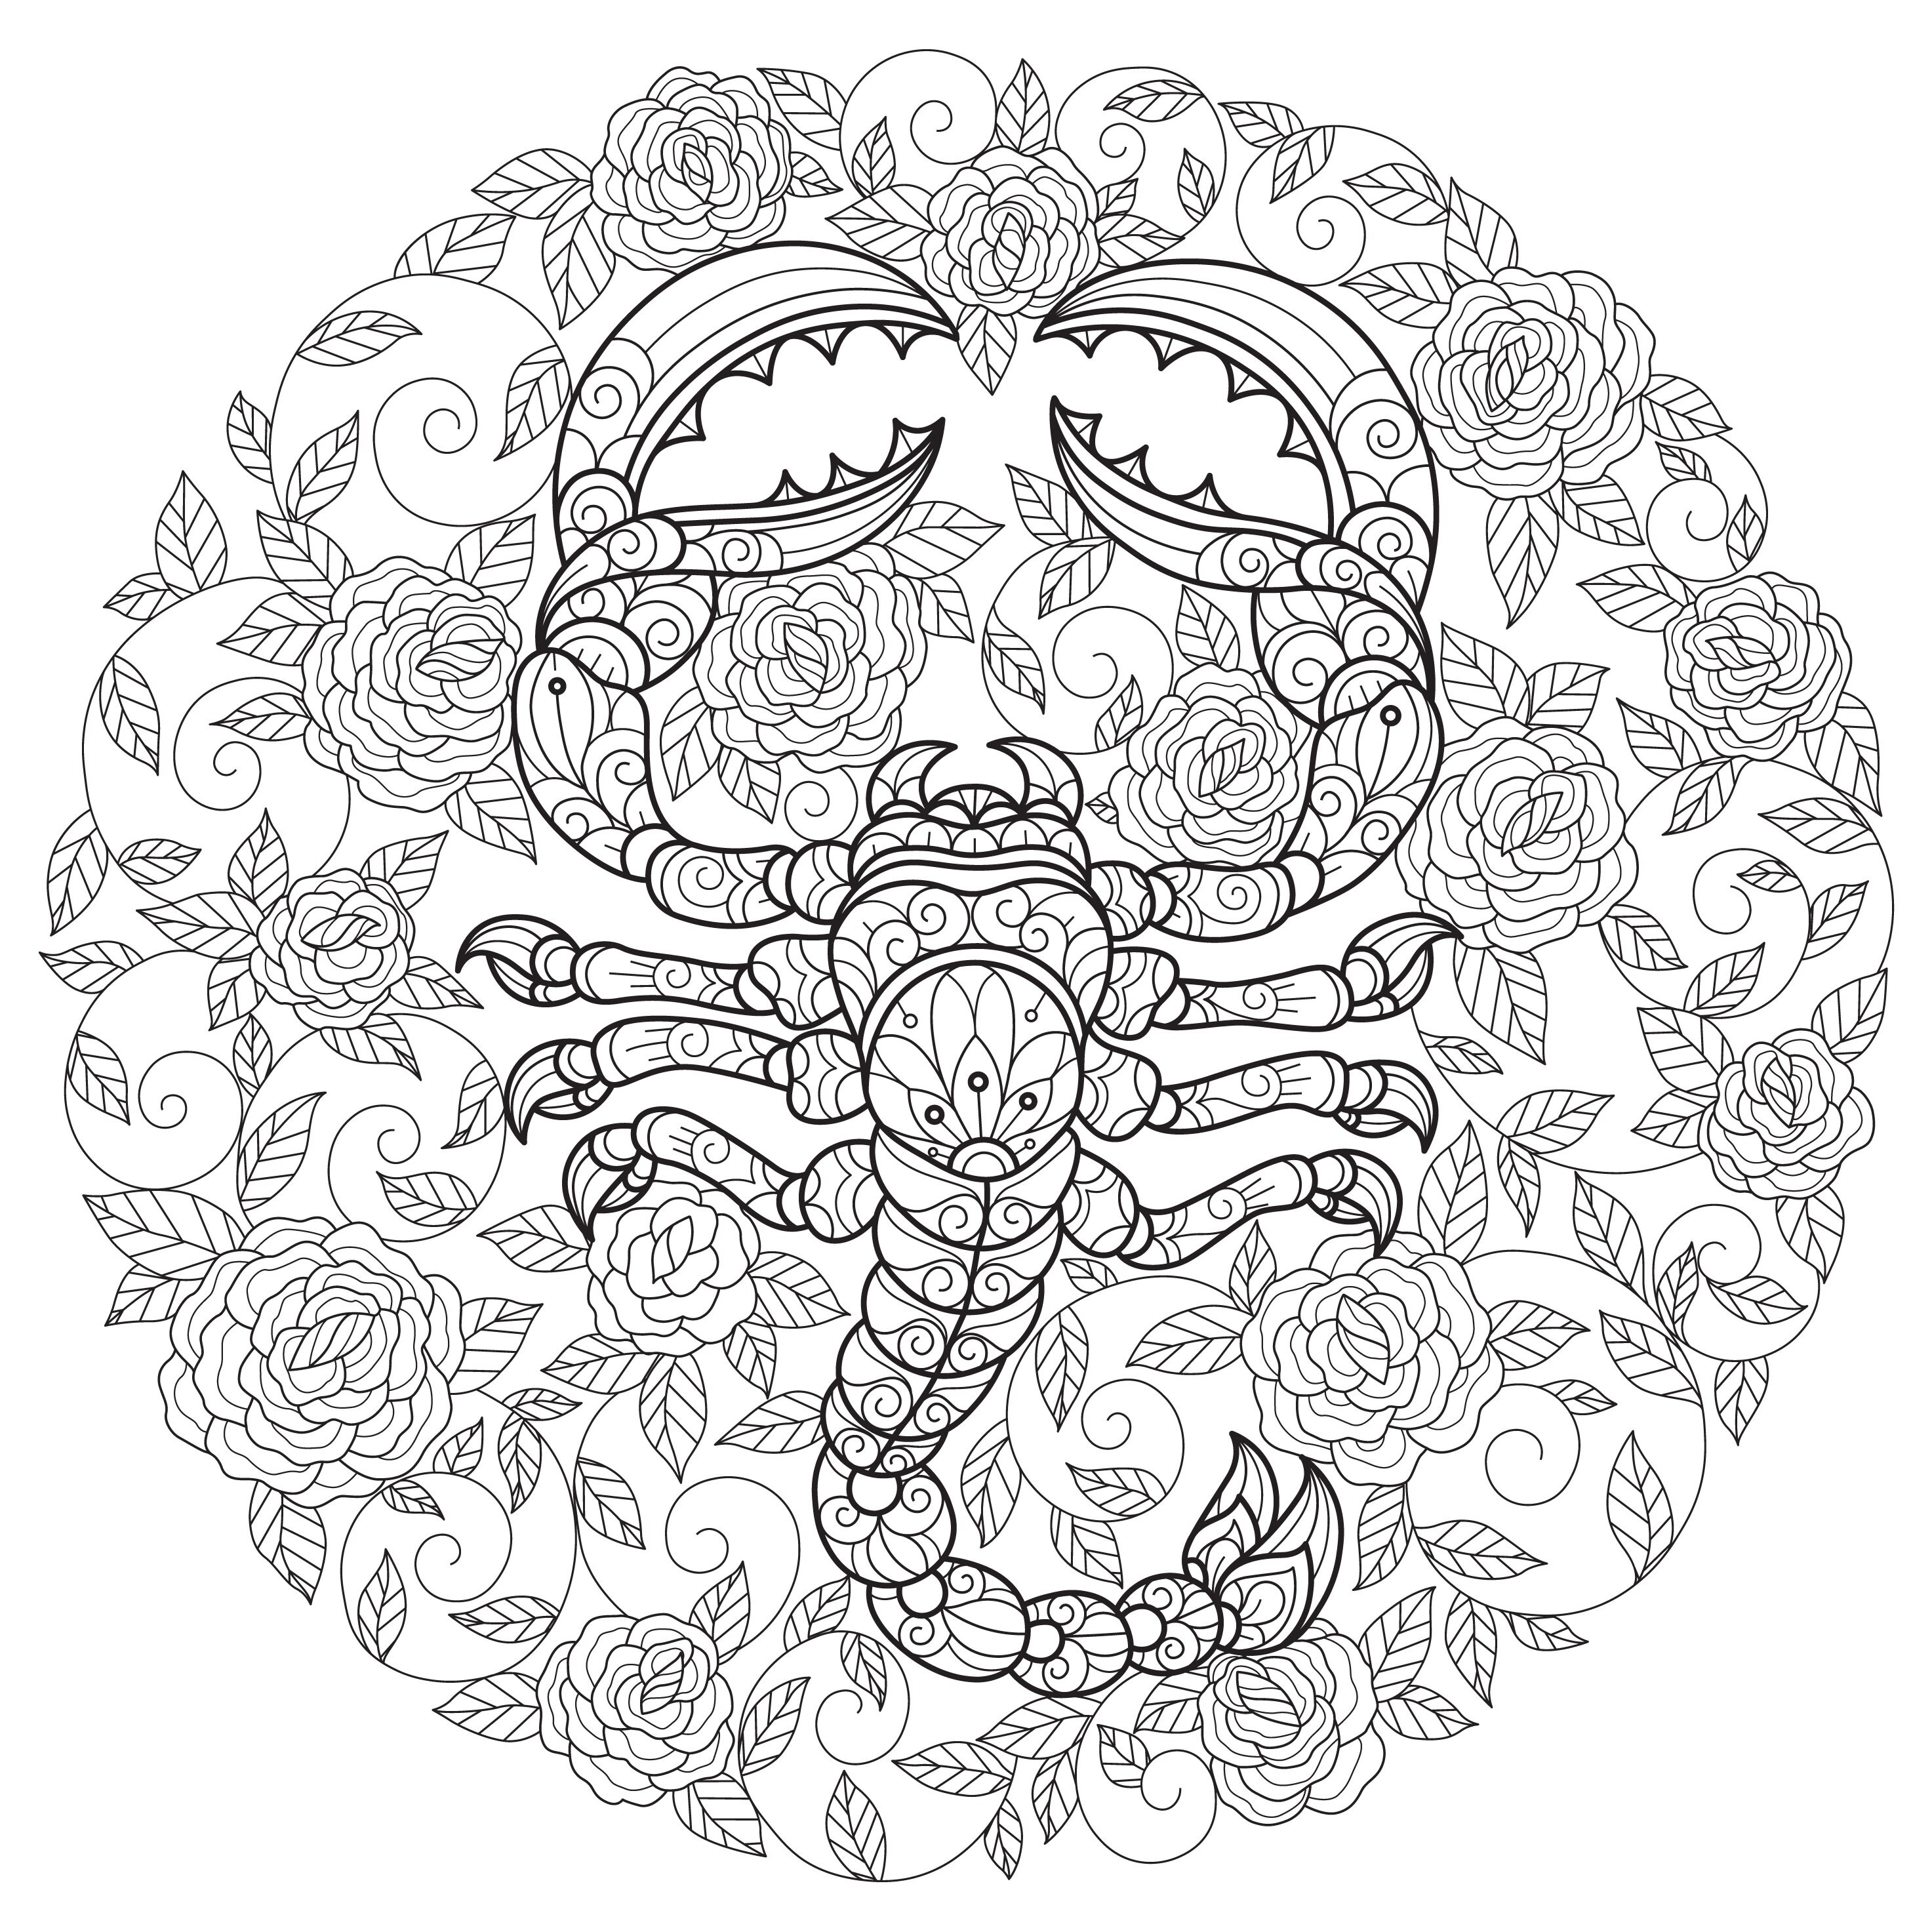 Scorpio and roses digital printable coloring page medium difficulty download now